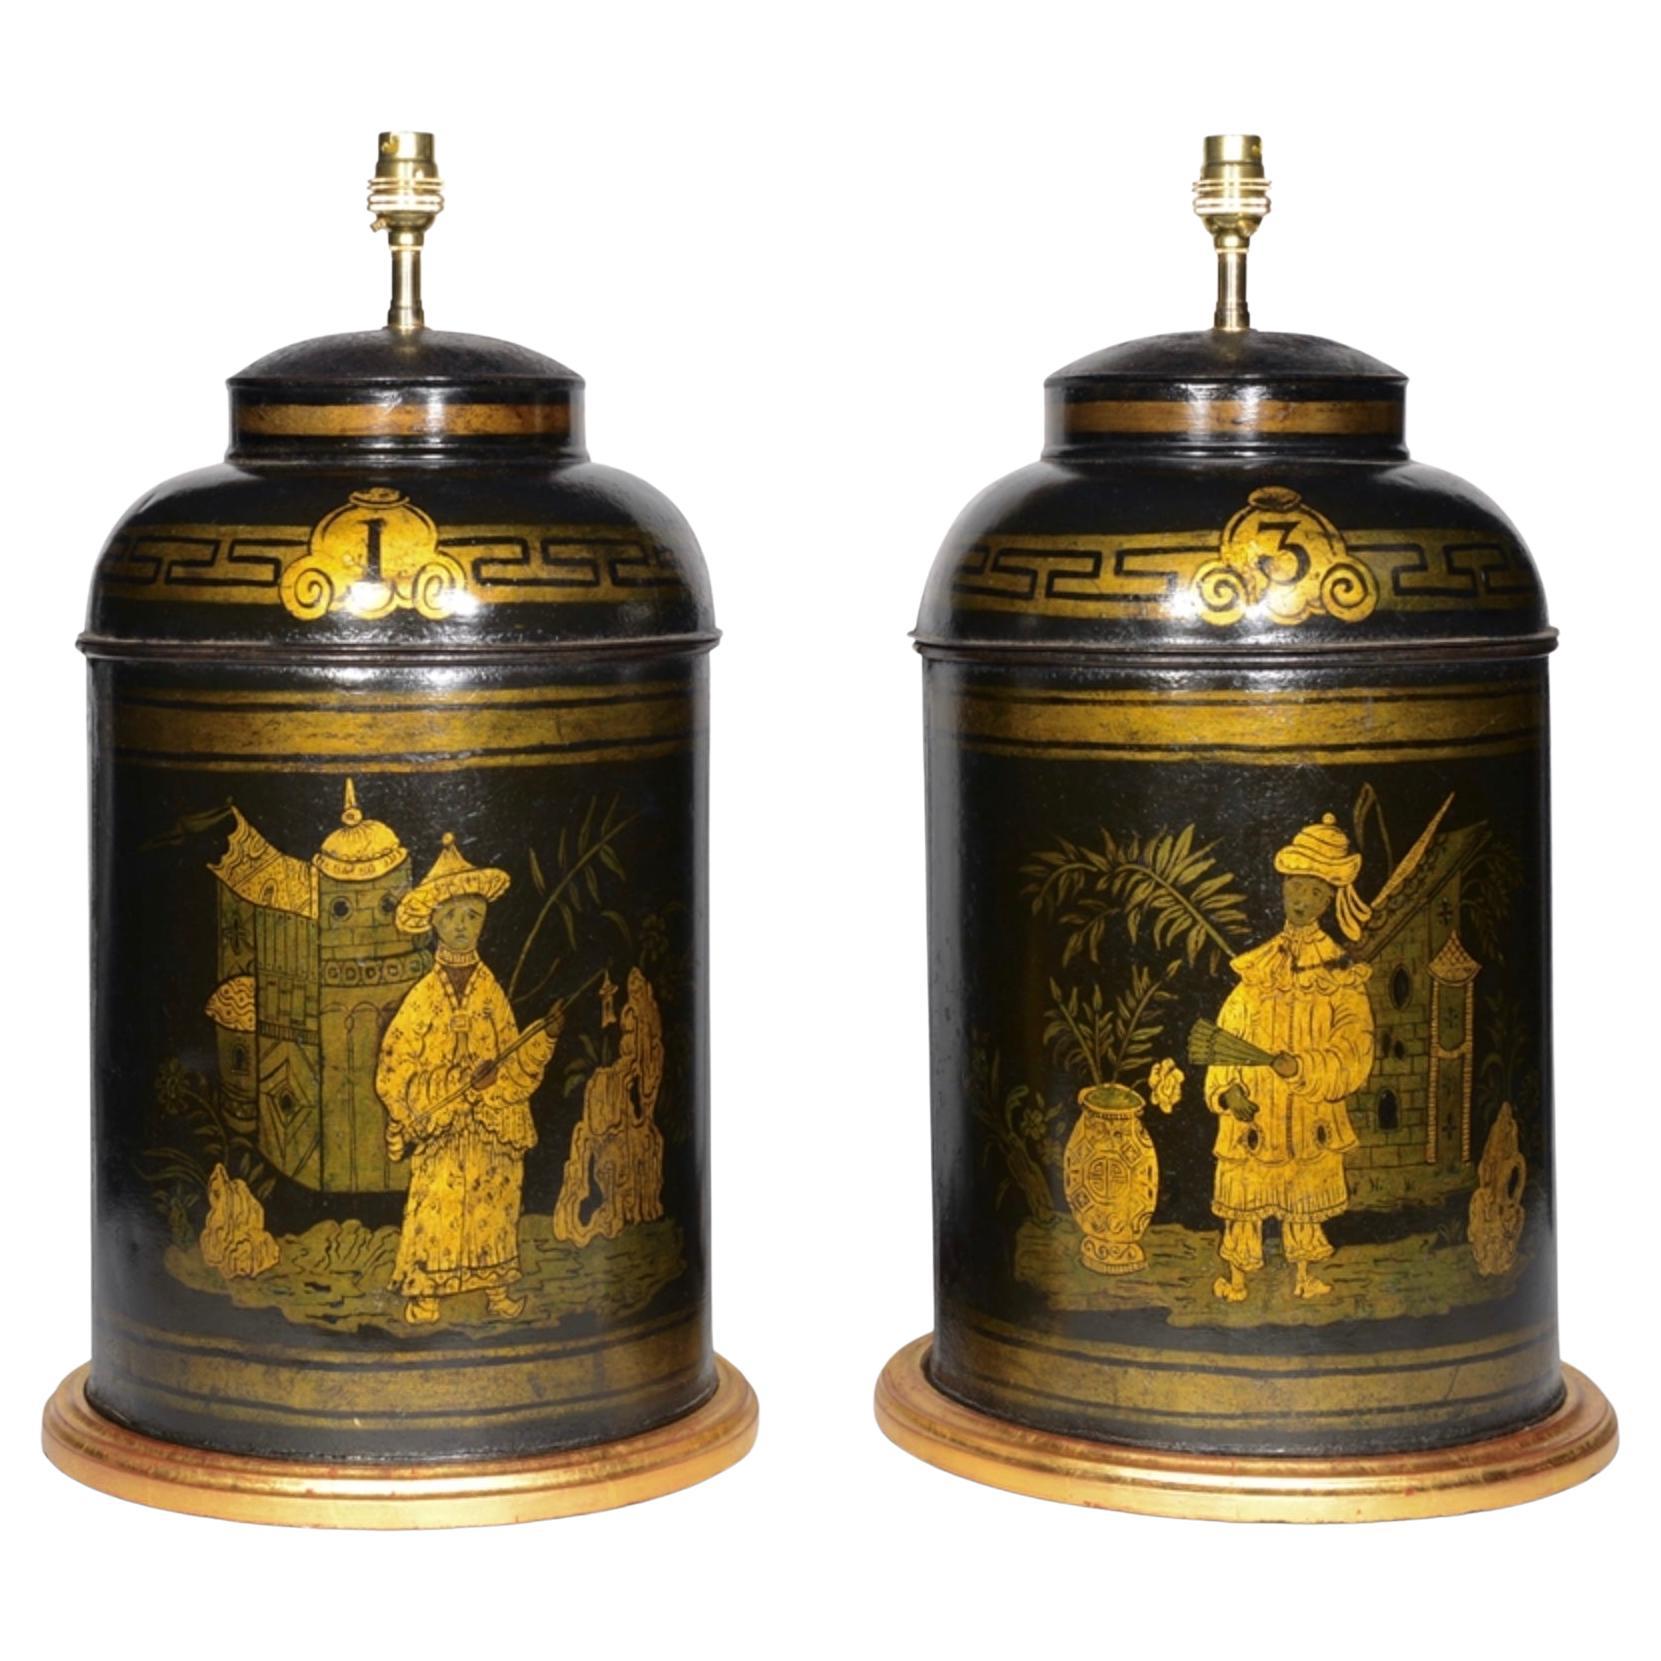 Pair of Gold and Black 19th Century Tea Canister Antique Table Lamps For Sale